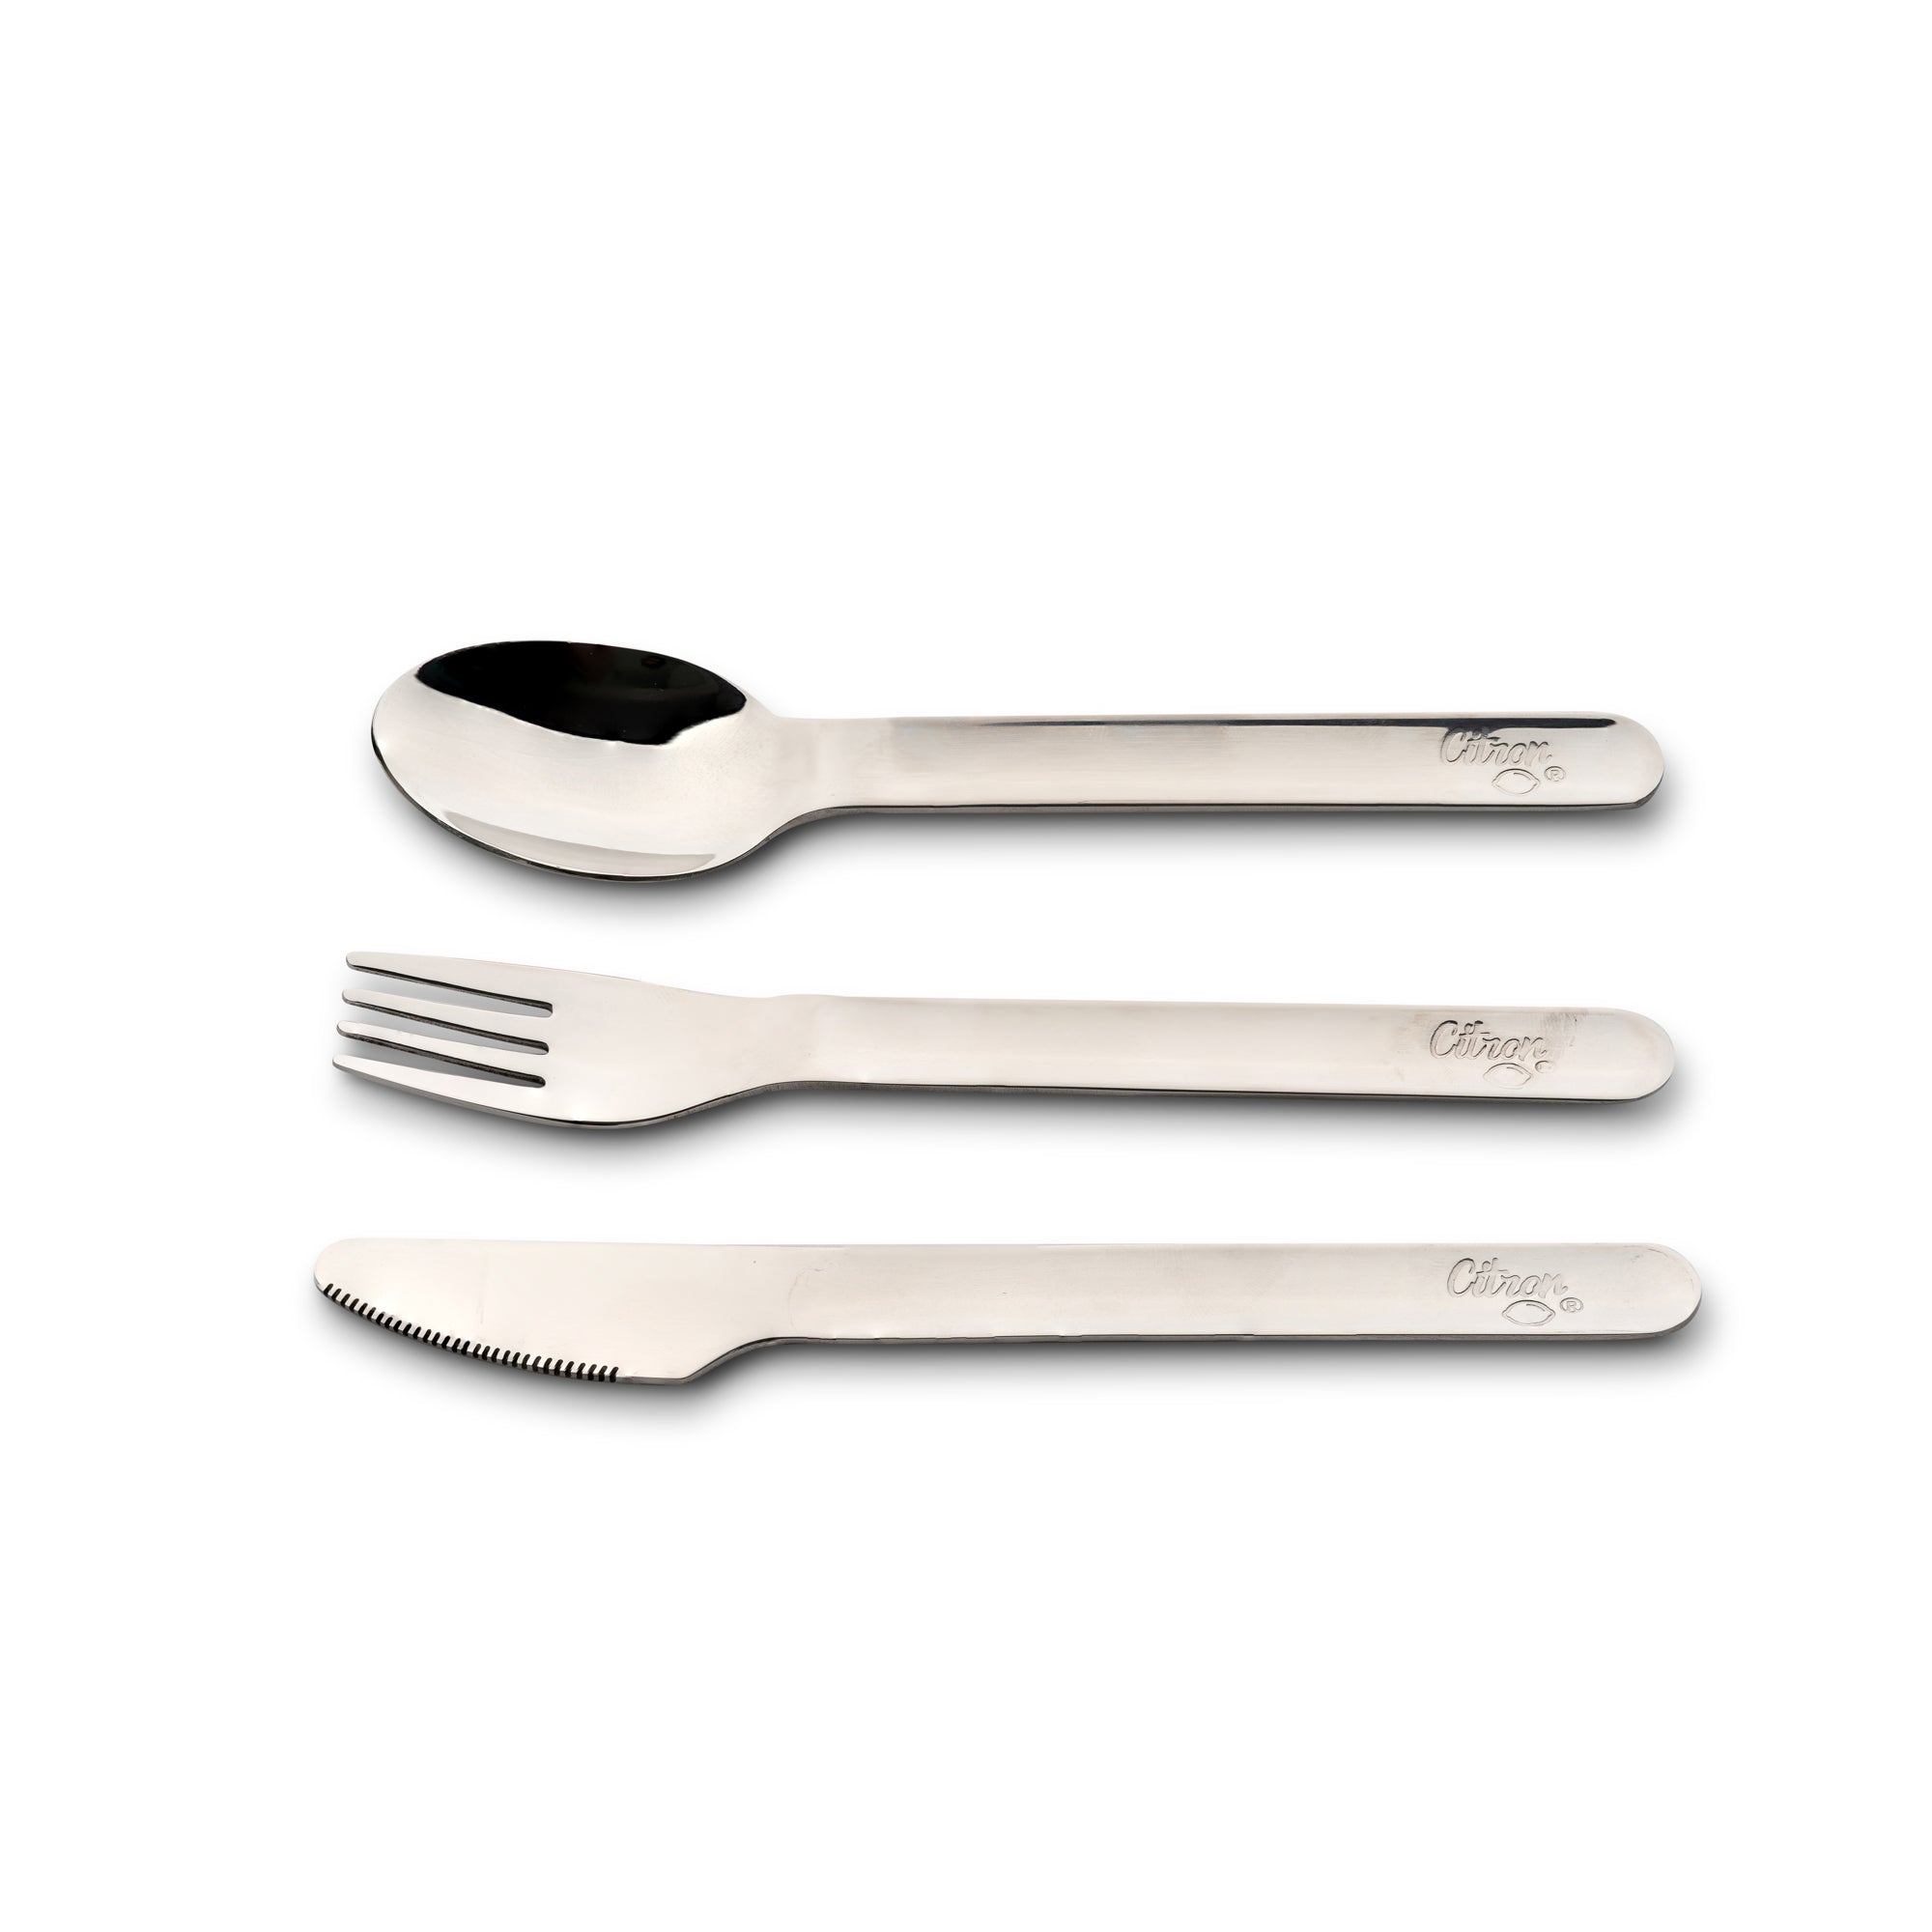 Cutlery Set with Silicone Case